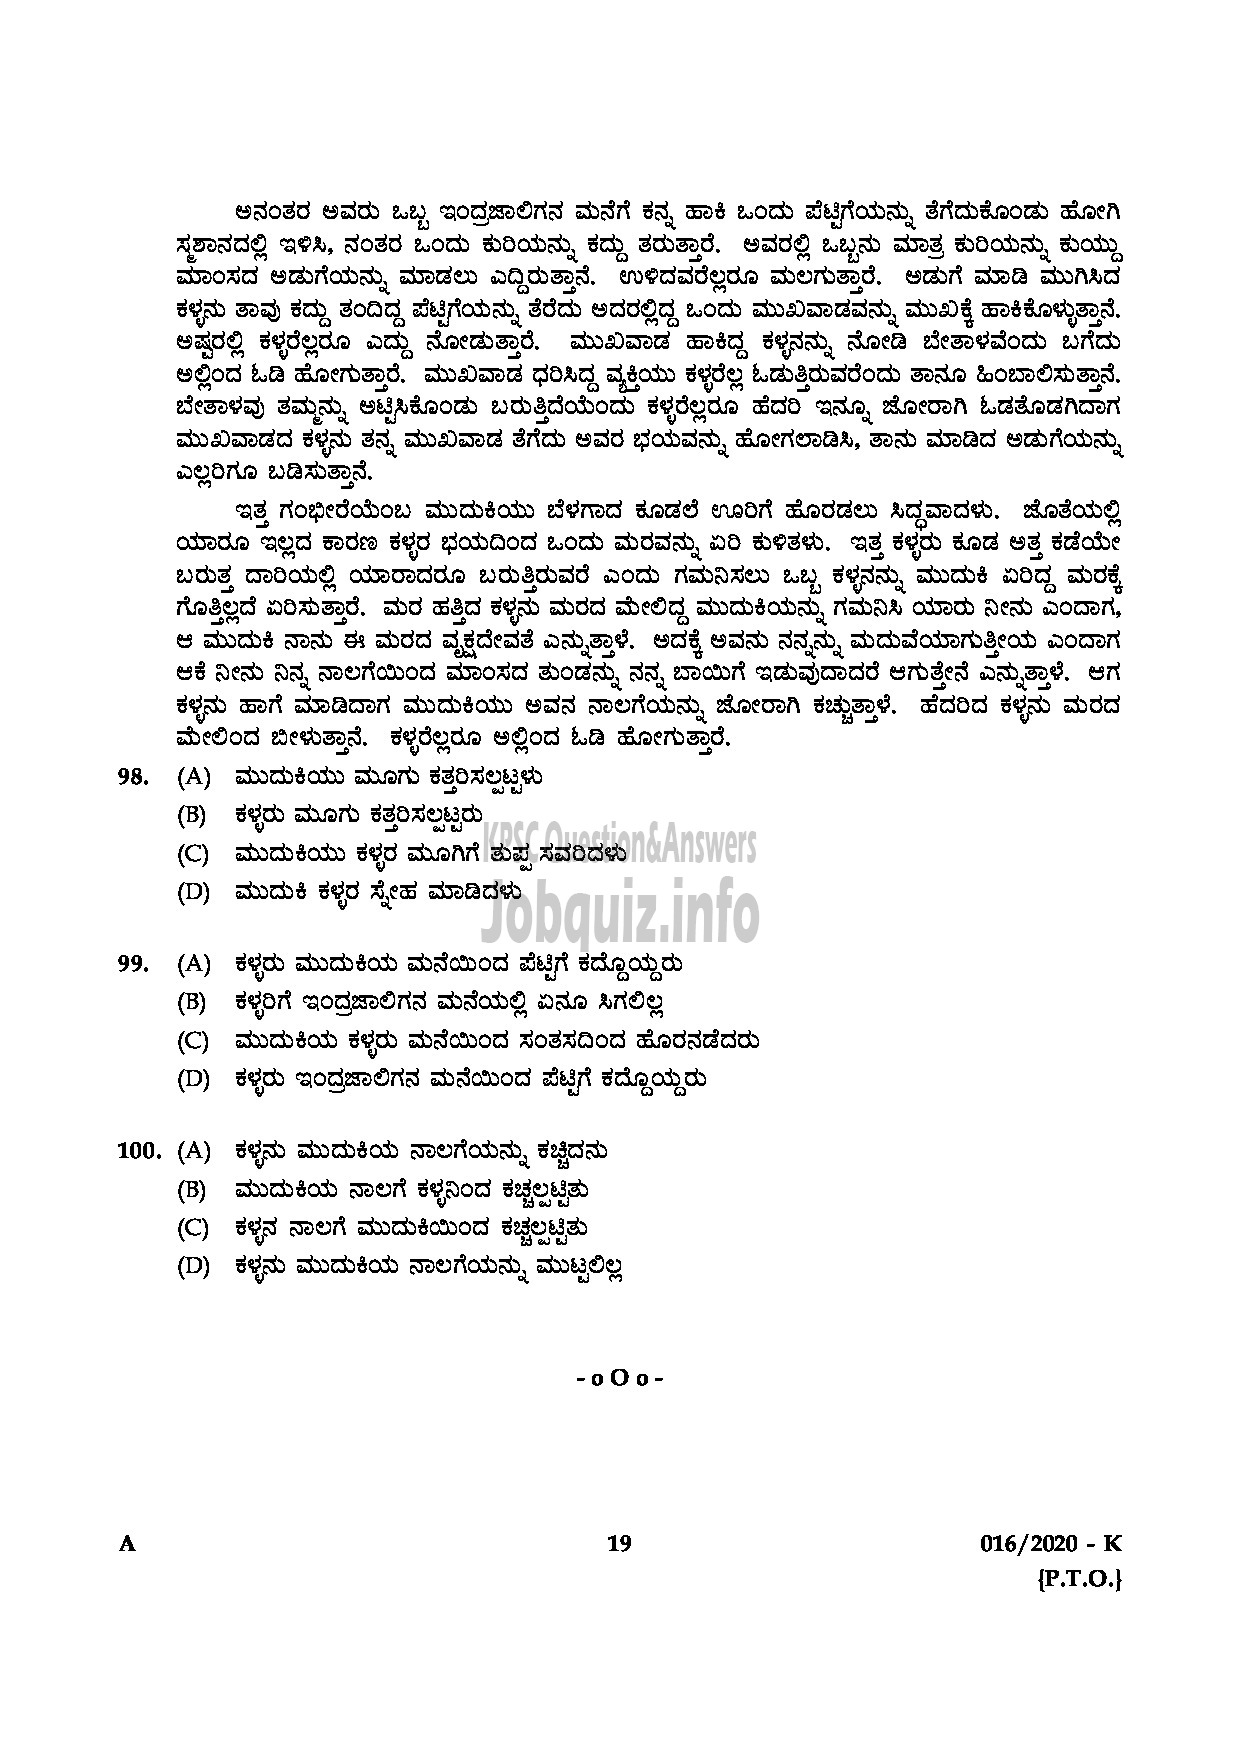 Kerala PSC Question Paper - KAS OFFICER (JUNIOR TIME SCALE) TRAINEE KERALA ADMINISTRATIVE SERVICE ENGLISH / KANNADA-19